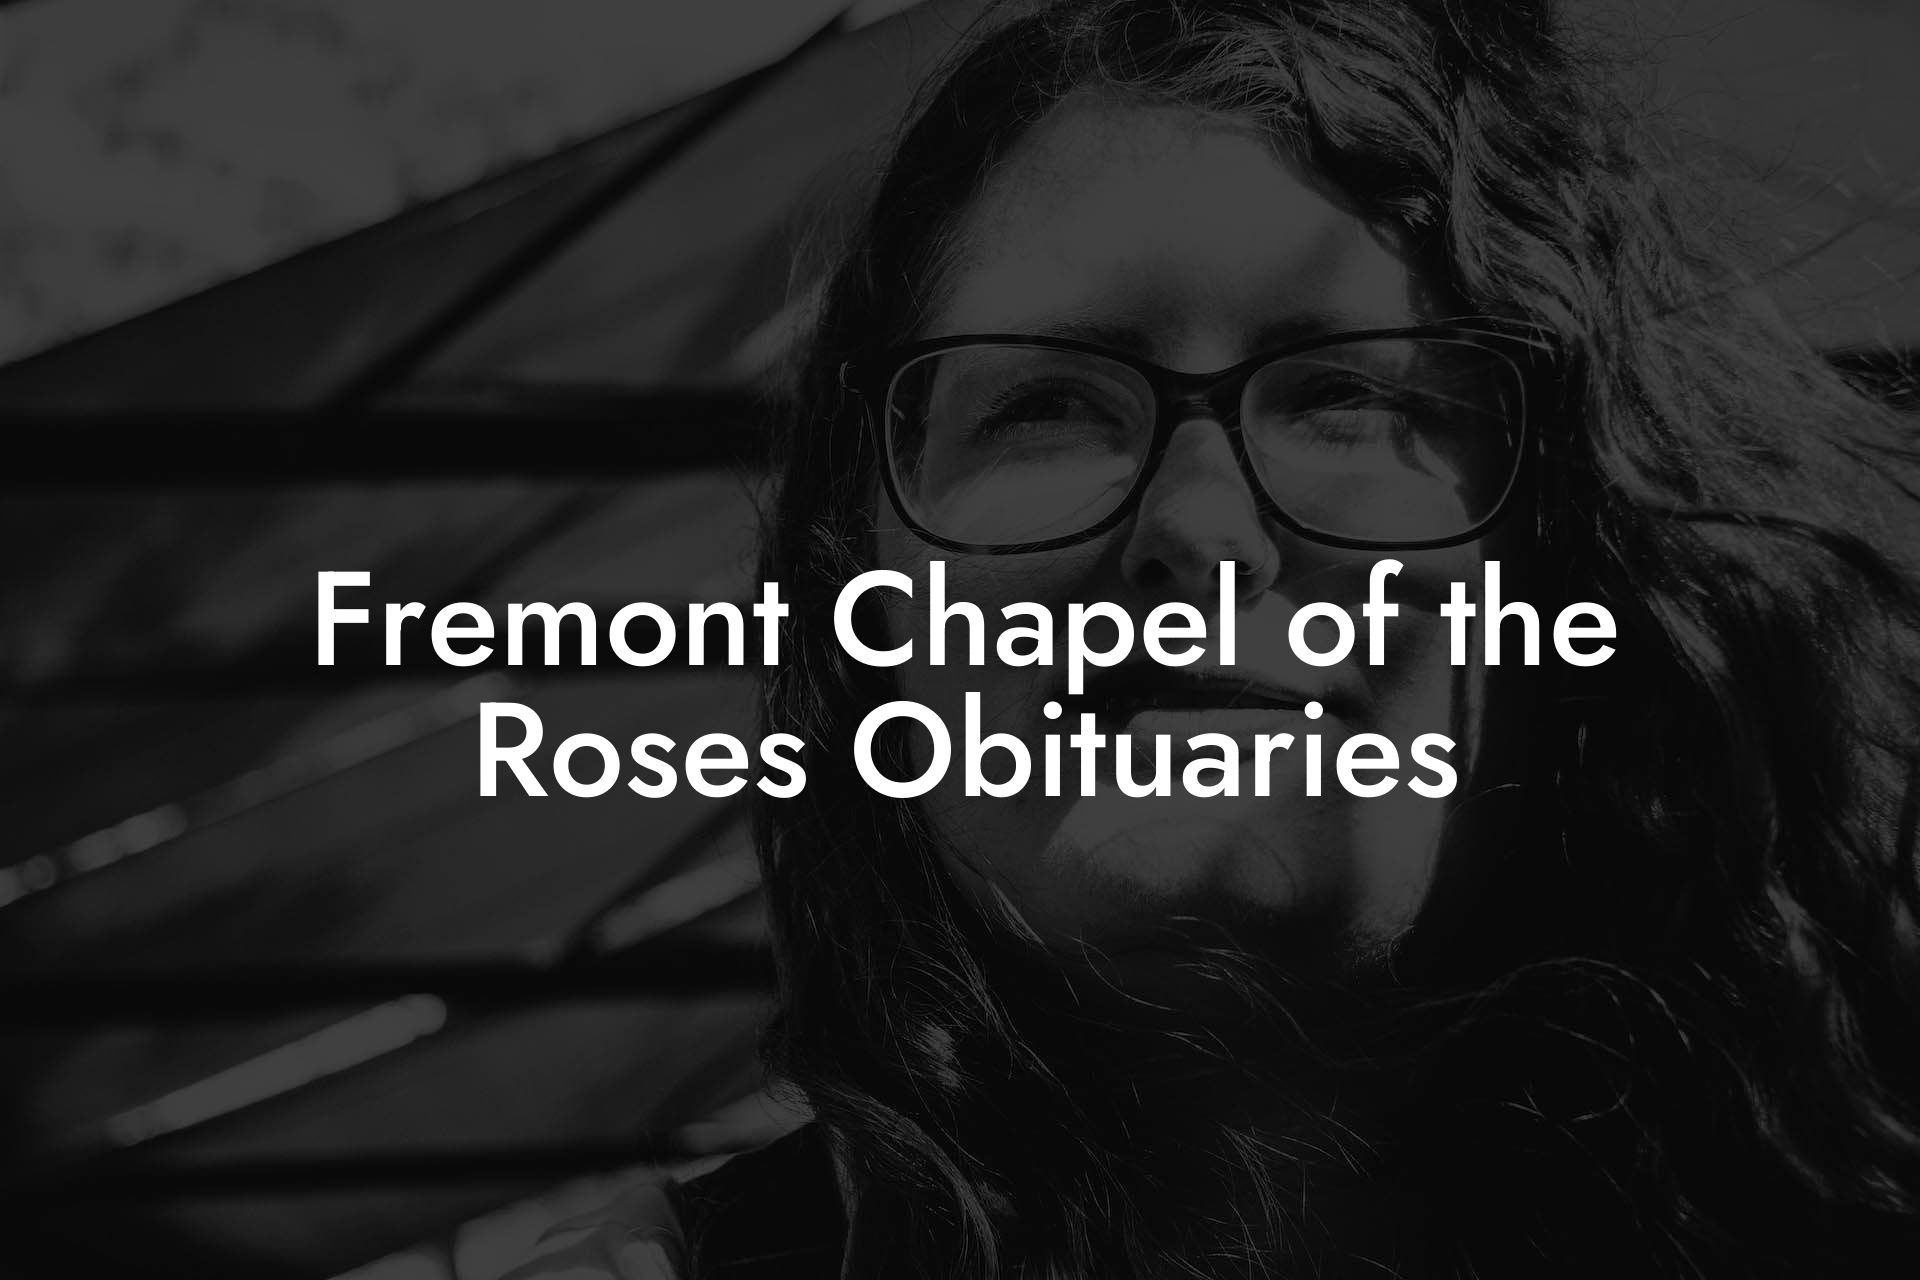 Fremont Chapel of the Roses Obituaries